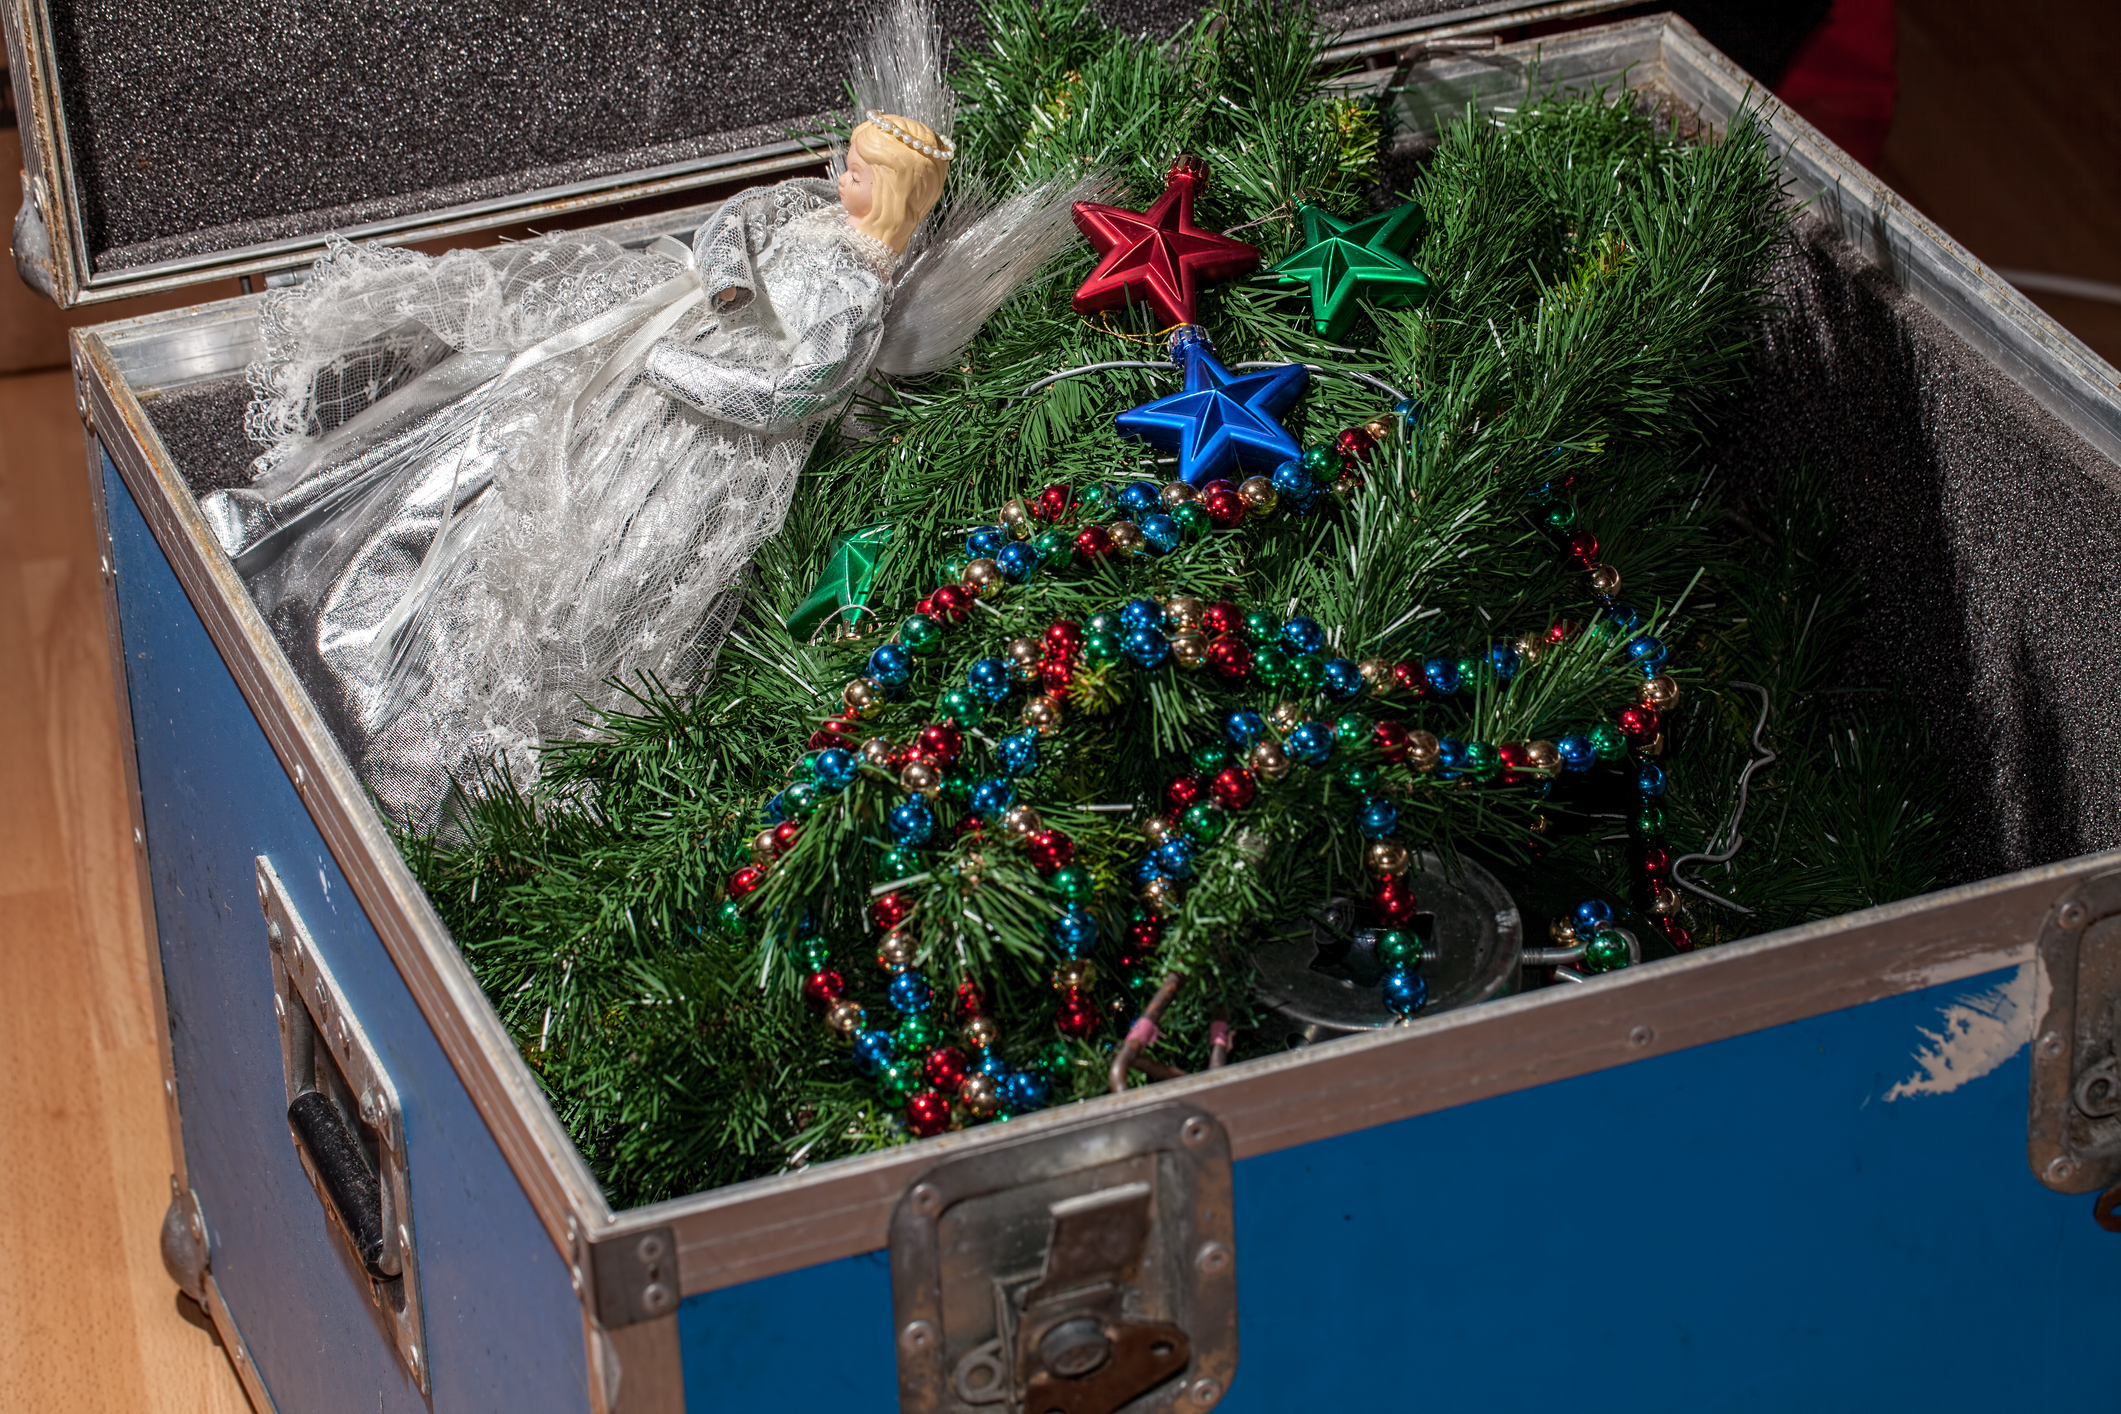 Packing Up the Christmas Tree